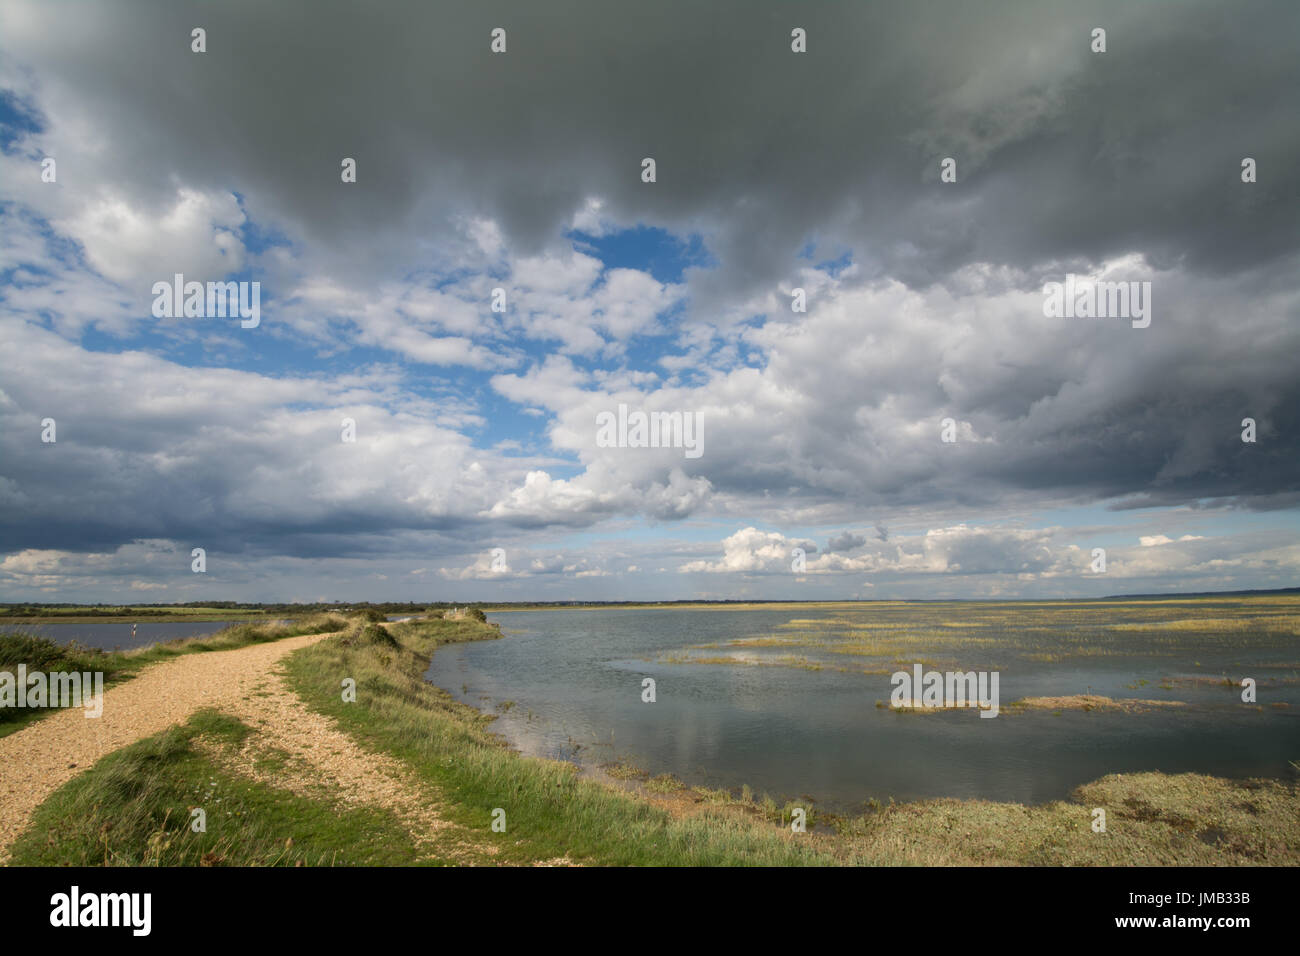 View over Keyhaven coastal marshes, an important overwintering site for birds in Hampshire, UK, with storm clouds approaching Stock Photo